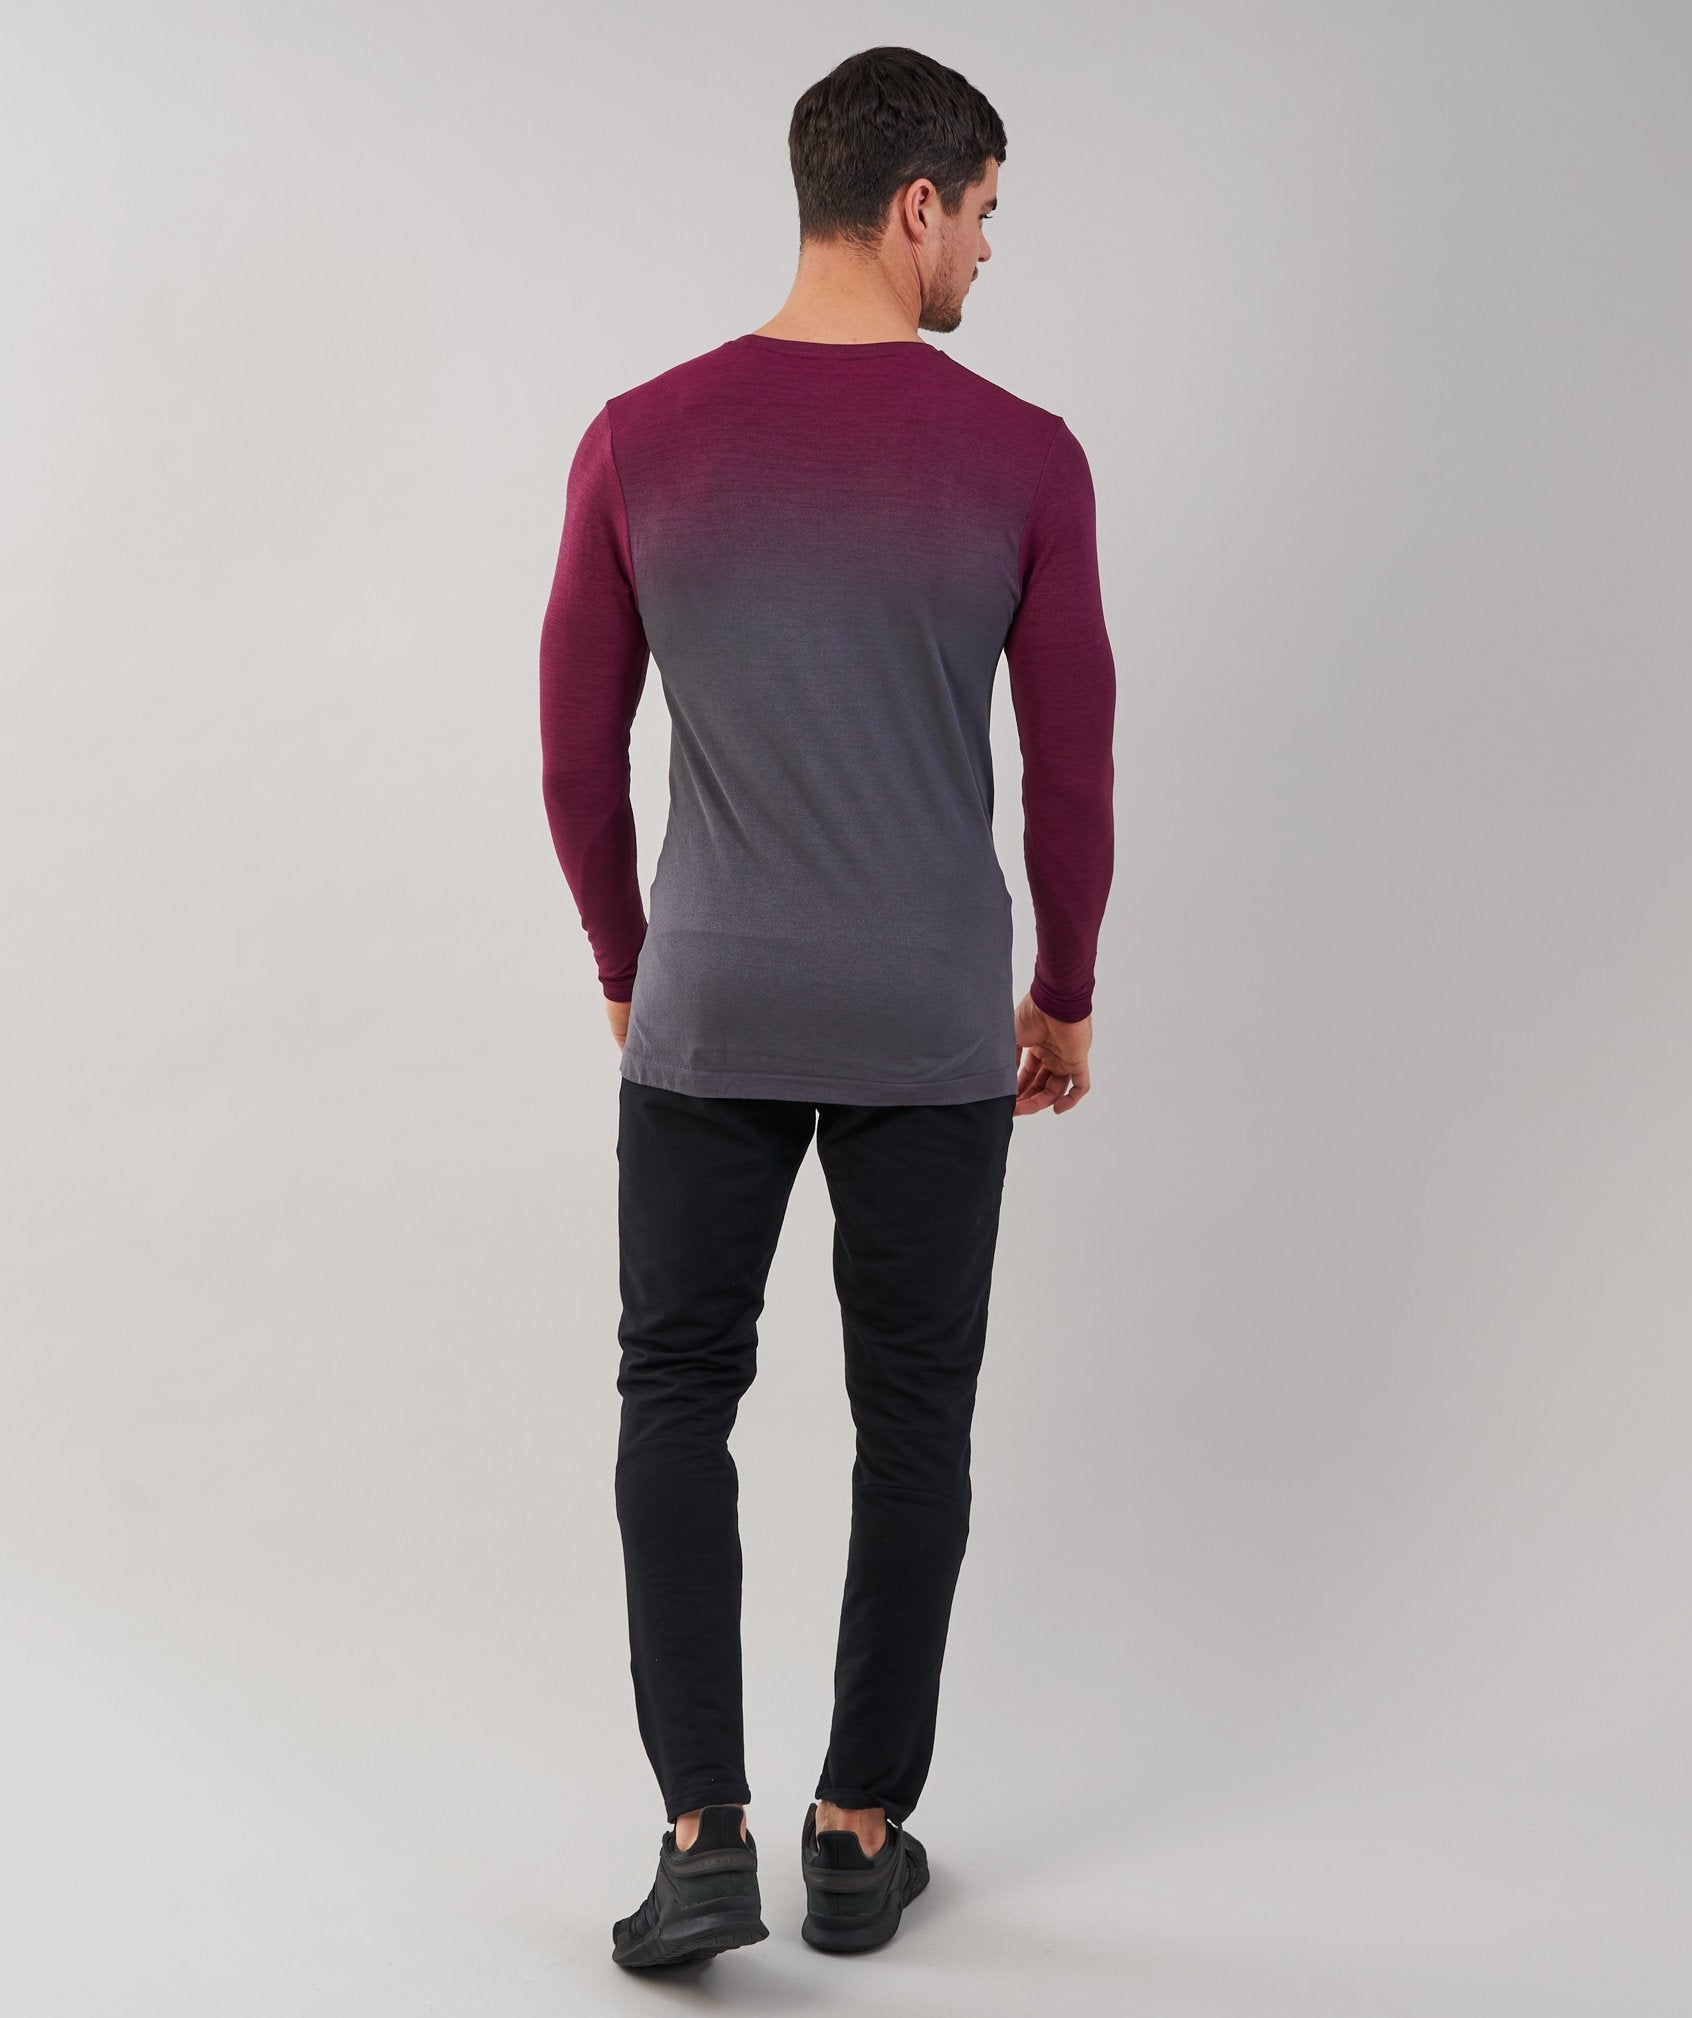 Ombre Long Sleeve T-Shirt in Port/Charcoal - view 2